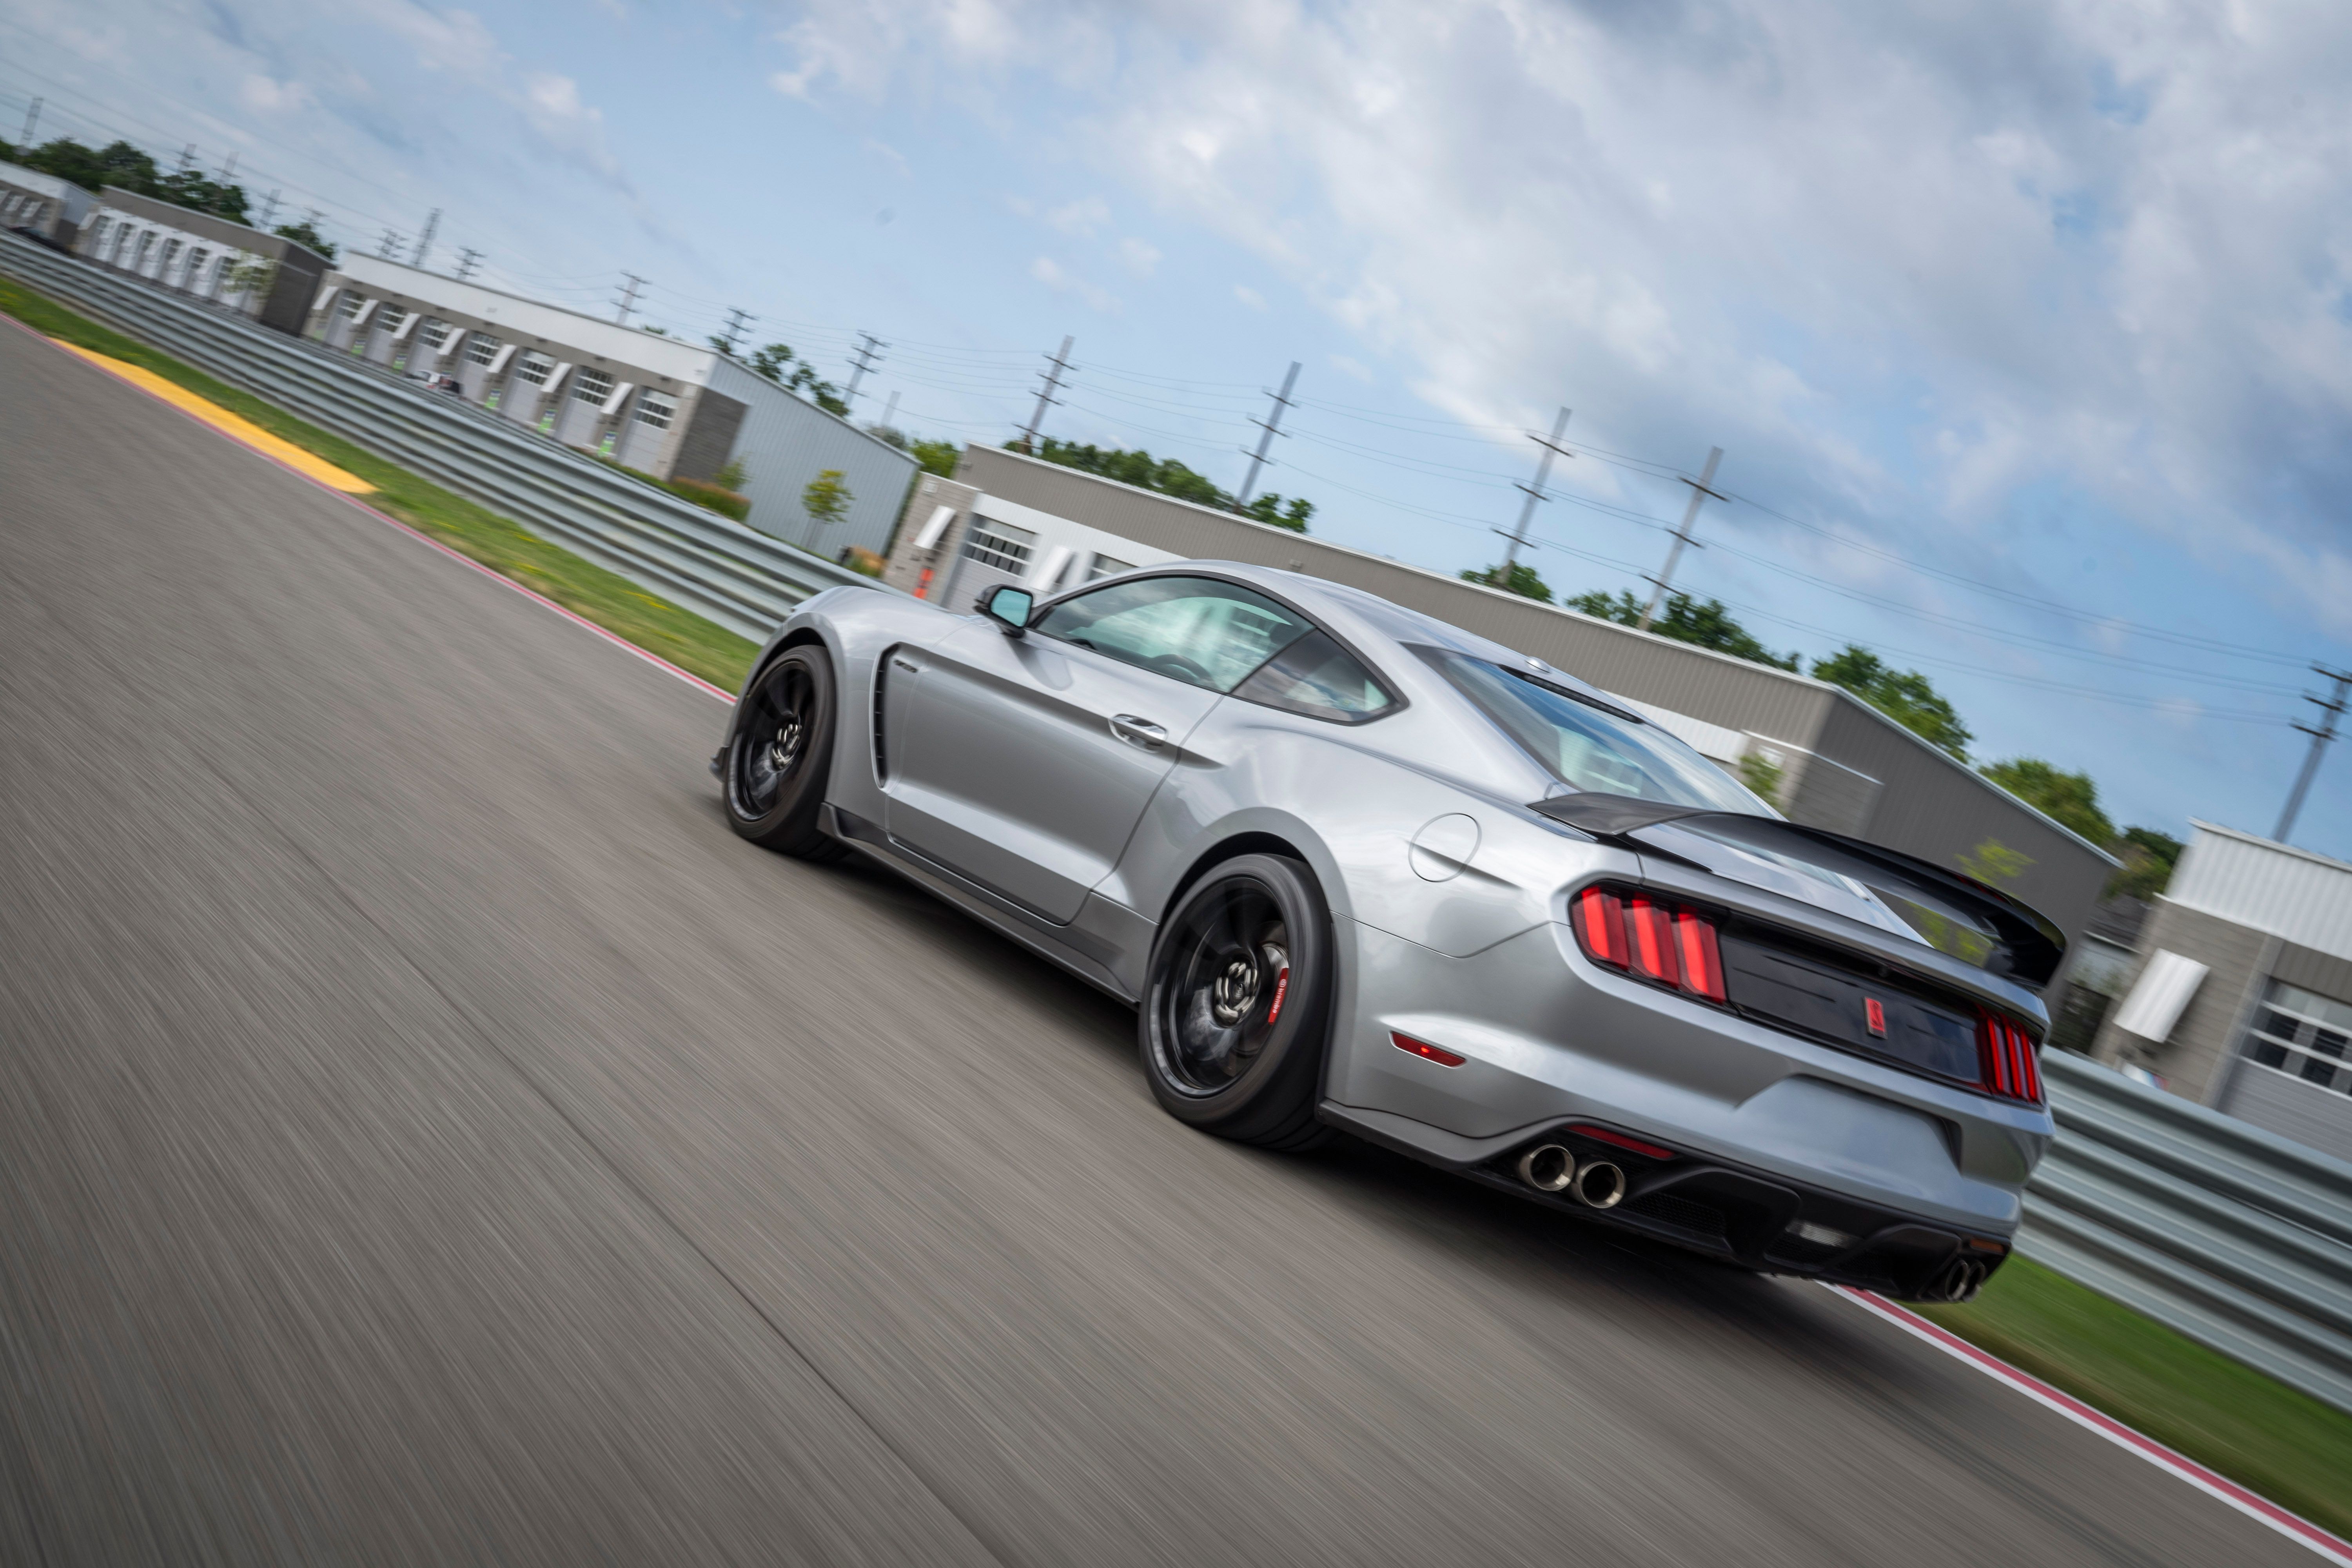 Shelby GT350R on track.